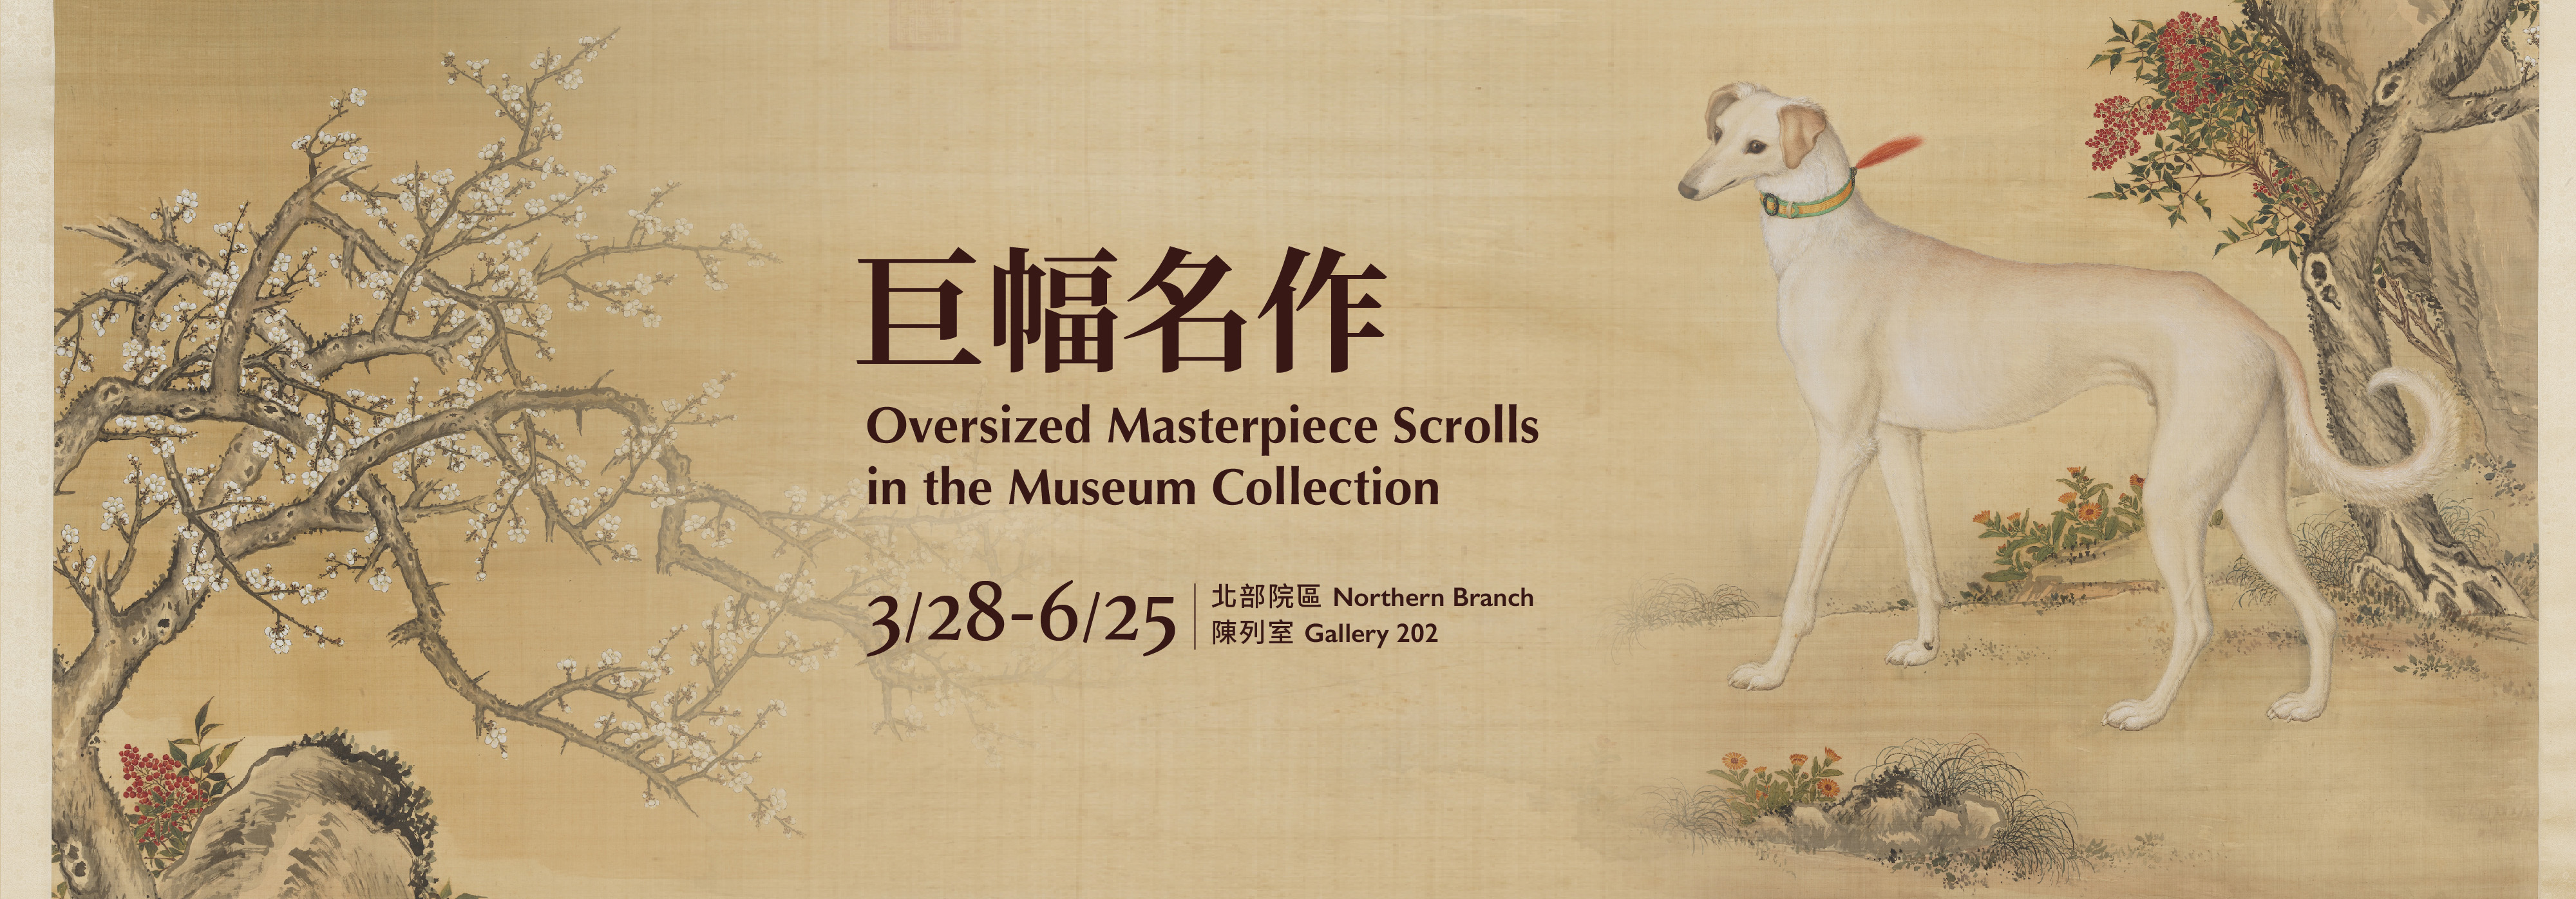 Oversized Masterpiece Scrolls in the Museum Collection